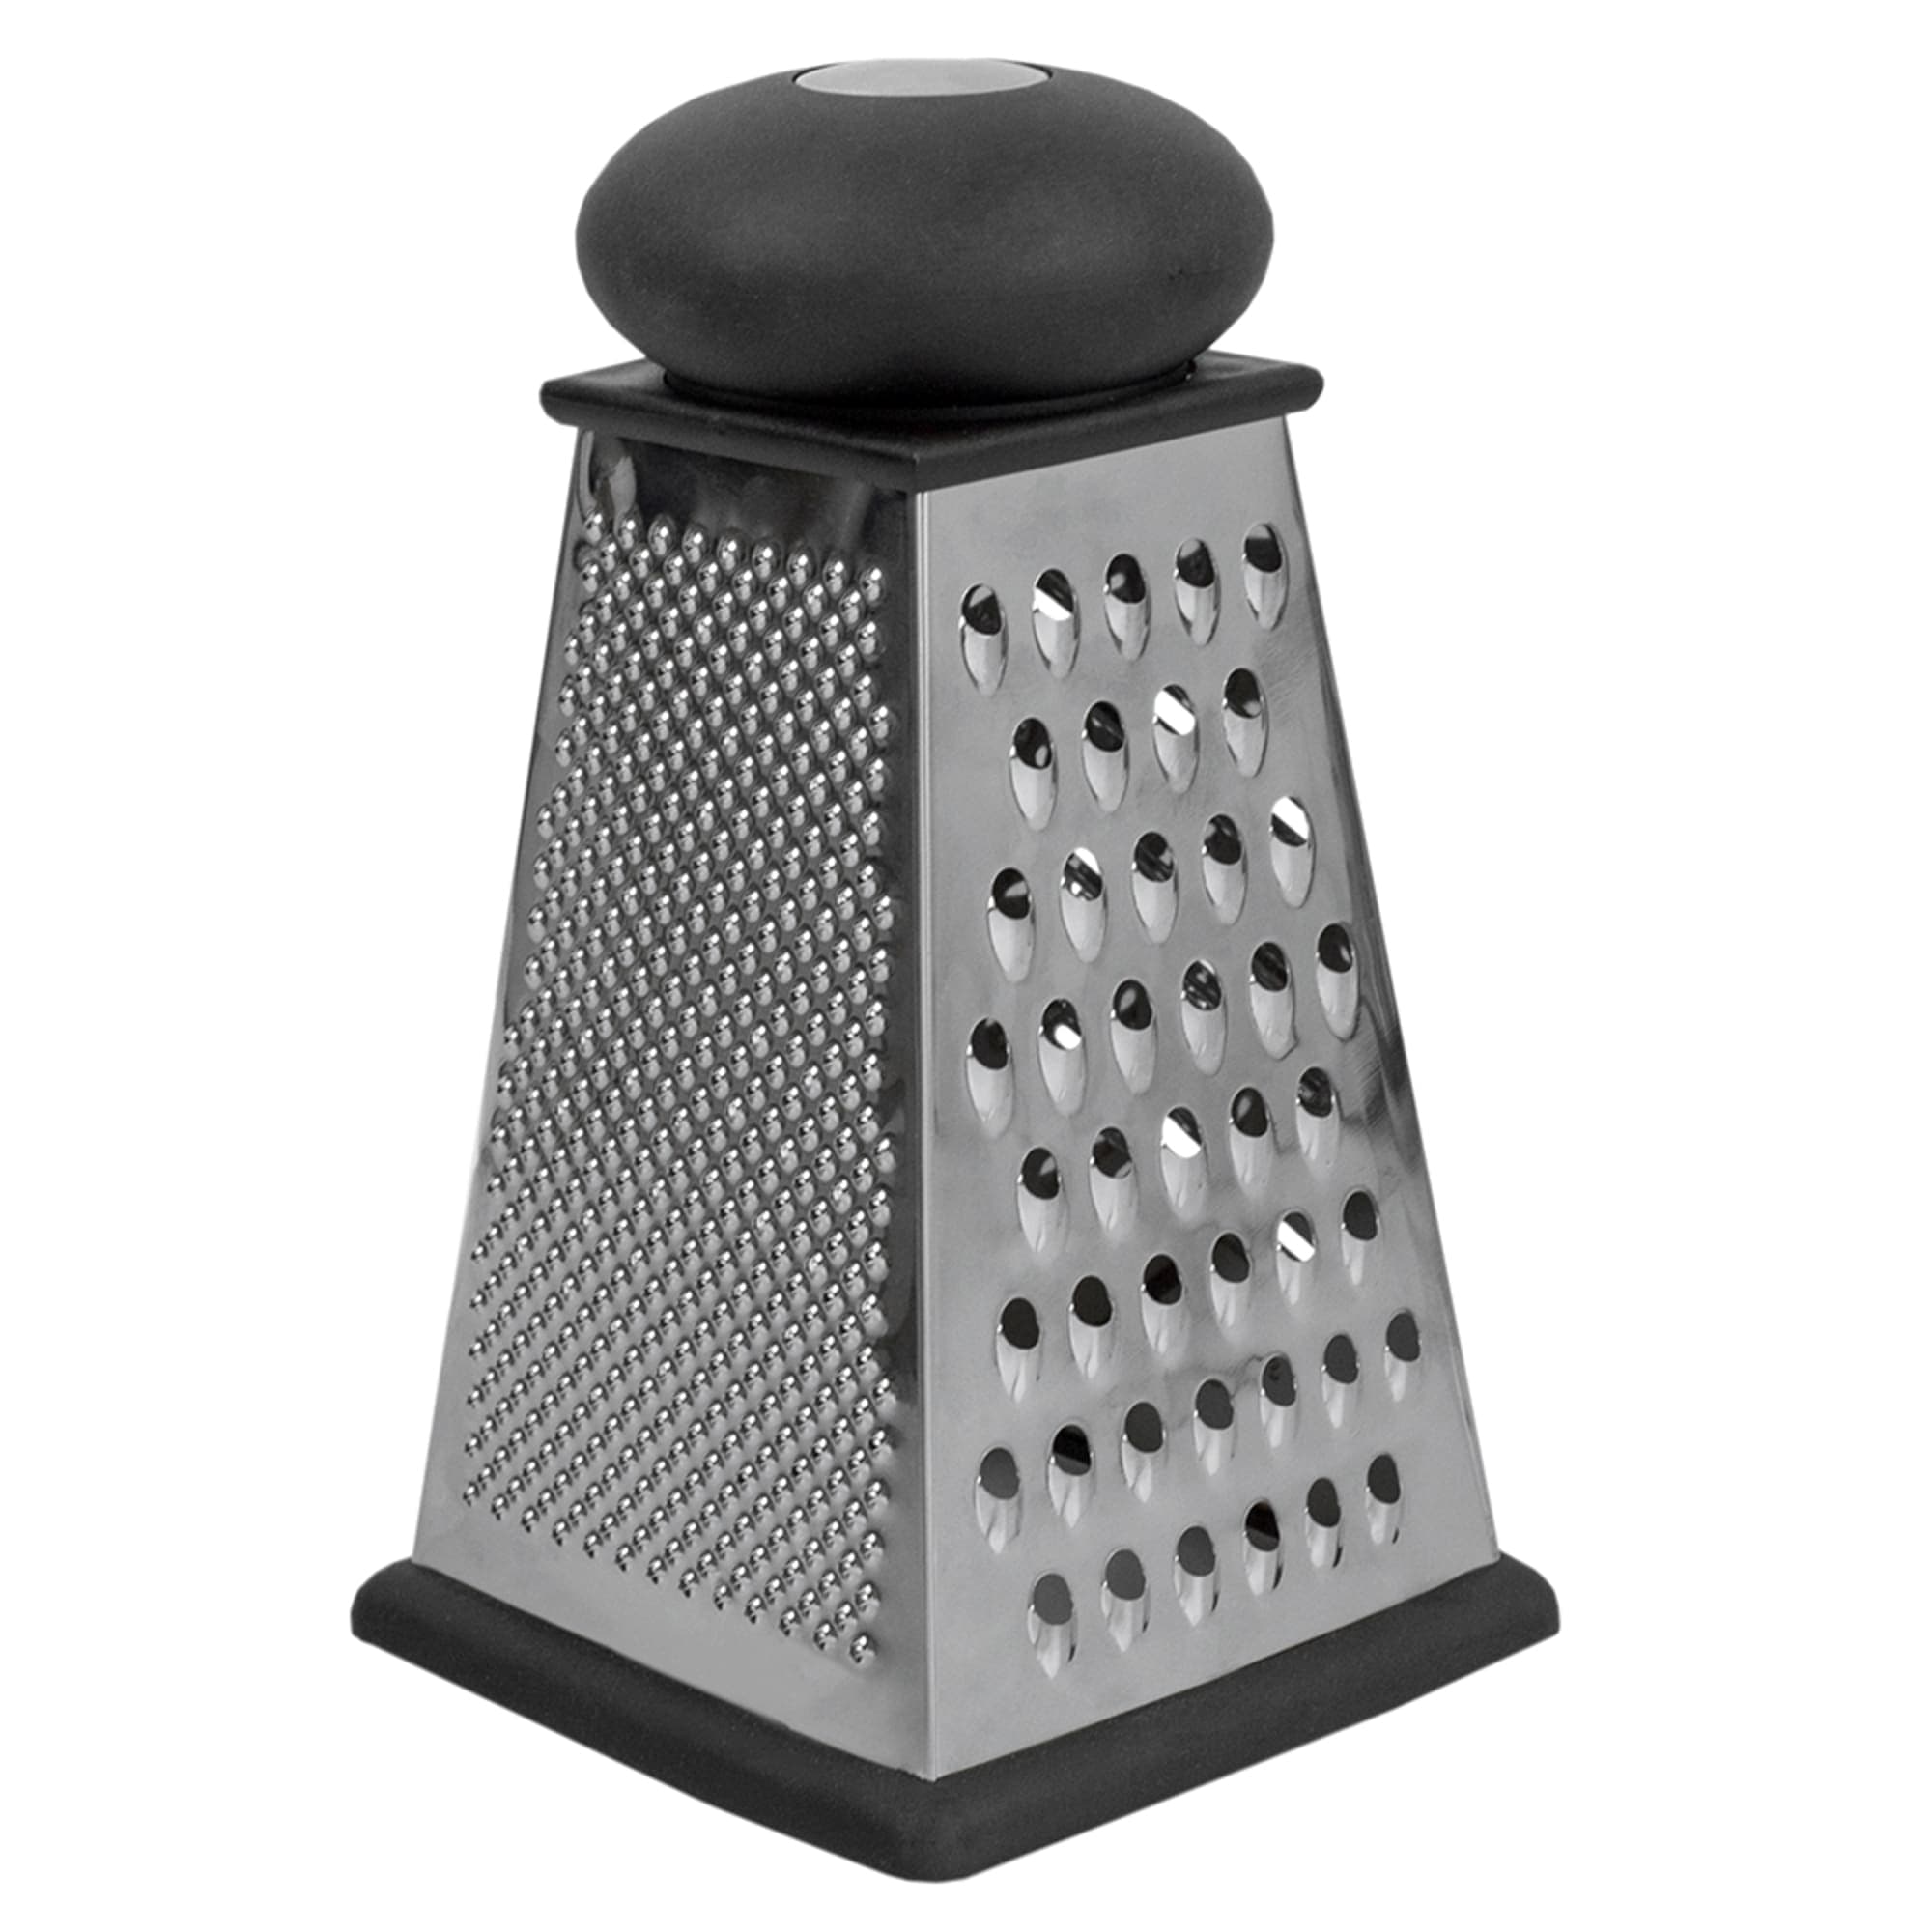 Home Basics Rotary Cheese Grater & Reviews